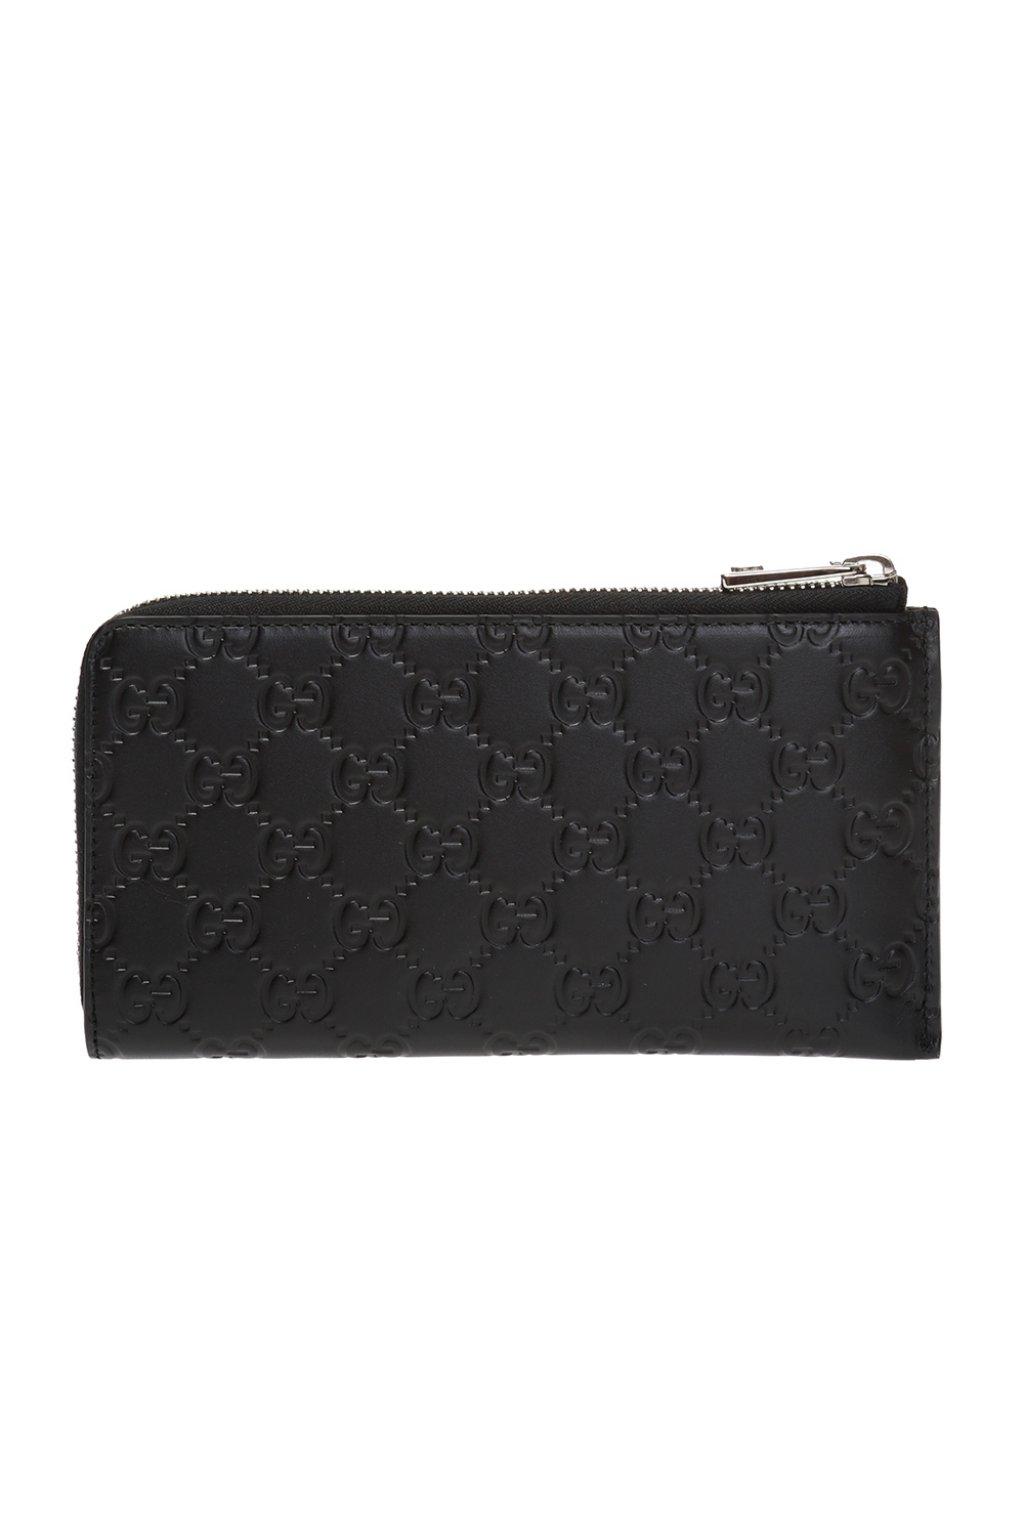 Gucci Leather Embossed Wallet in Black for Men - Lyst